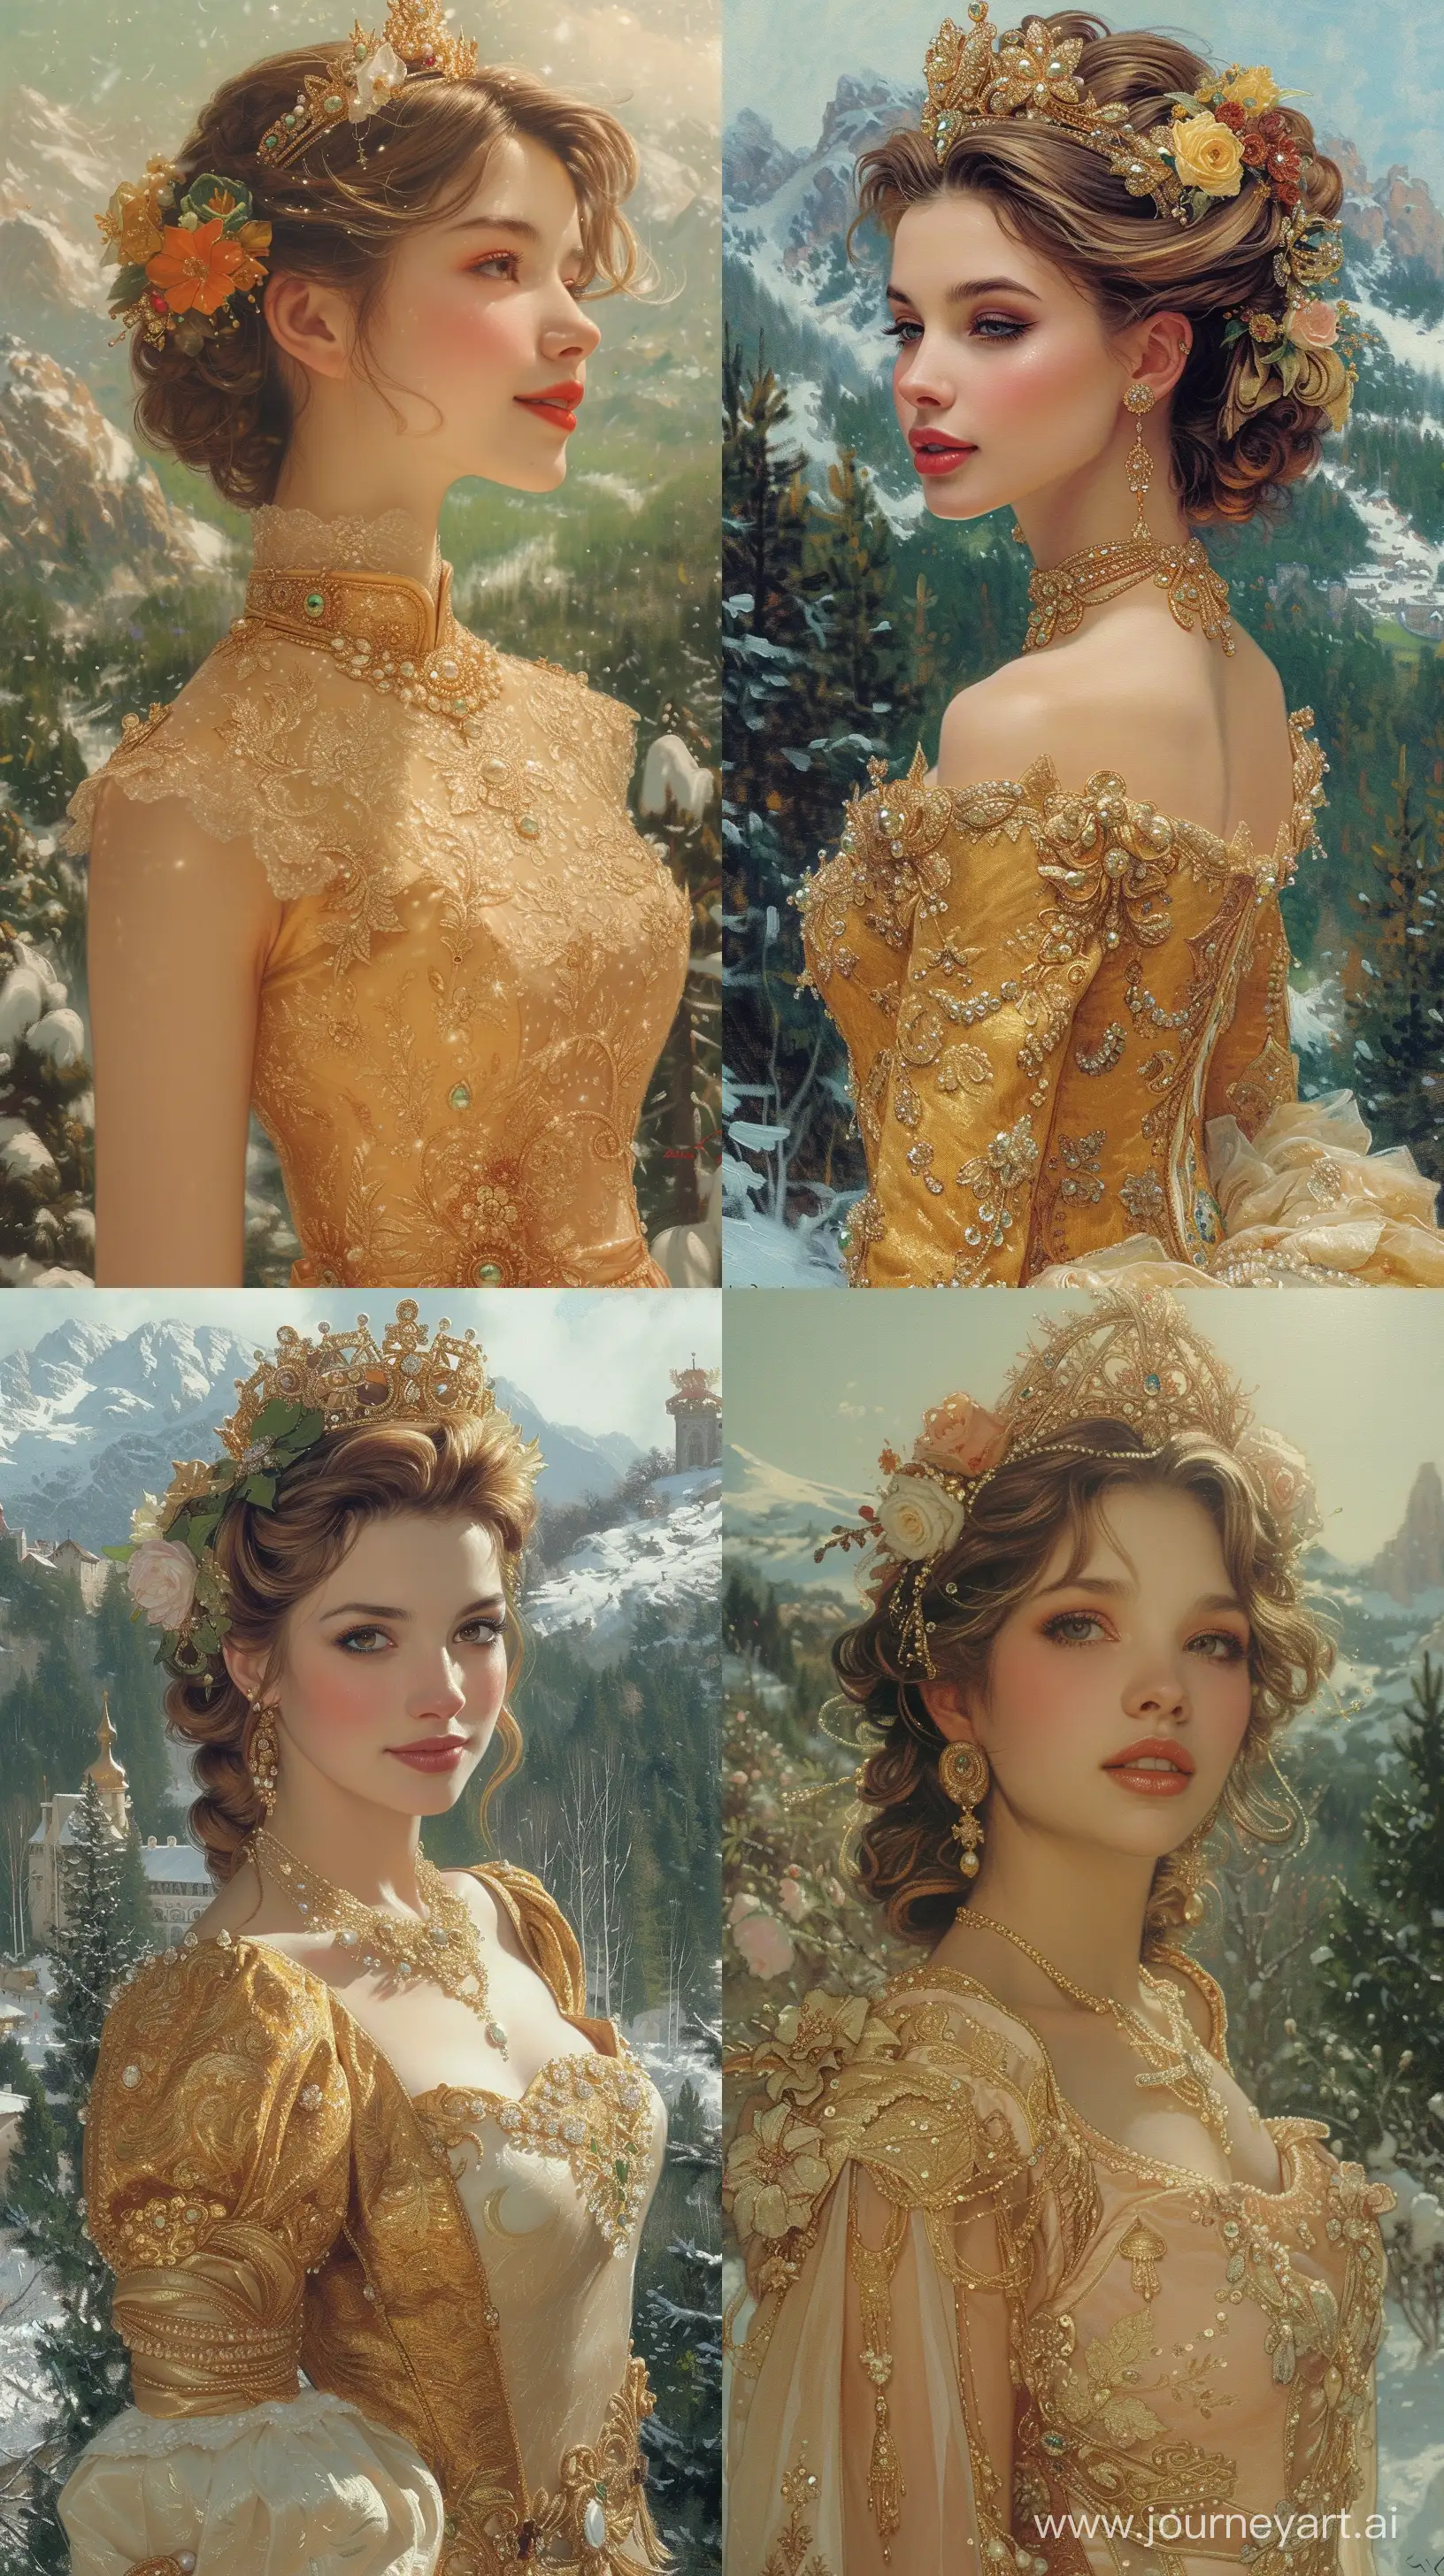 Enchanting-Fantasy-Portrait-Beautiful-Woman-in-Exotic-Gold-Dress-Blessing-Snowy-Landscape